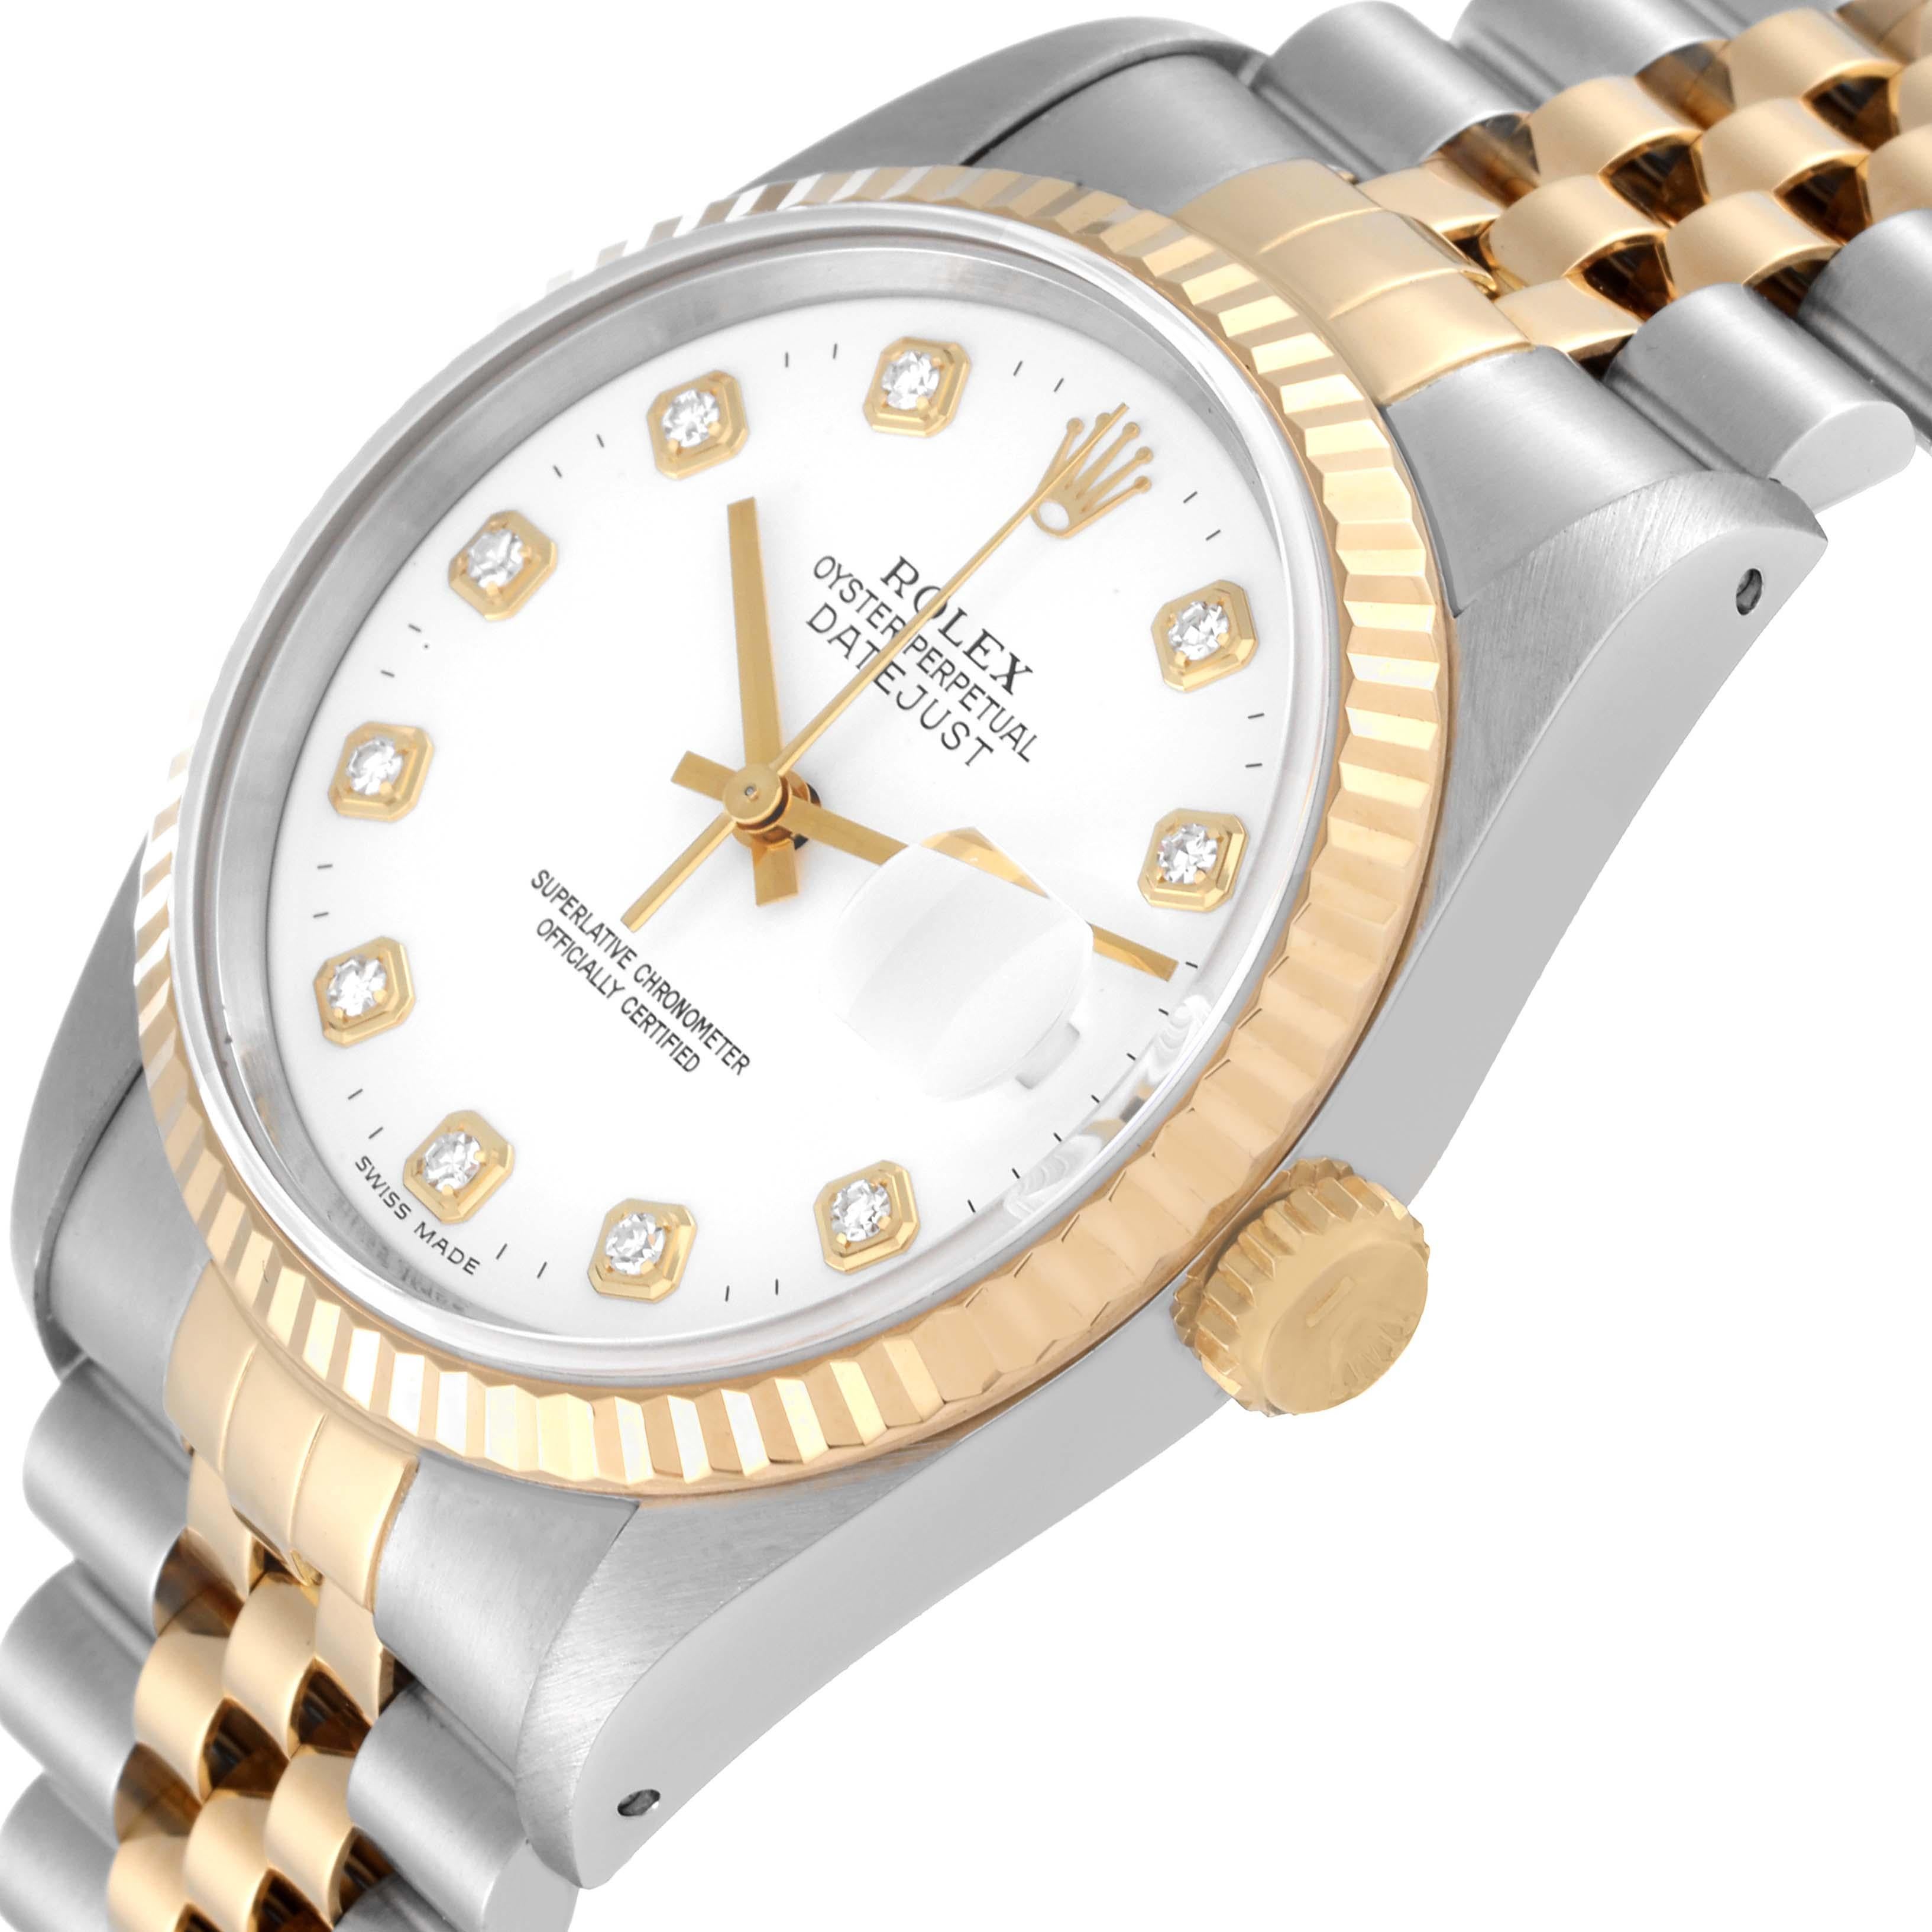 Rolex Datejust White Diamond Dial Steel Yellow Gold Mens Watch 16233 For Sale 1